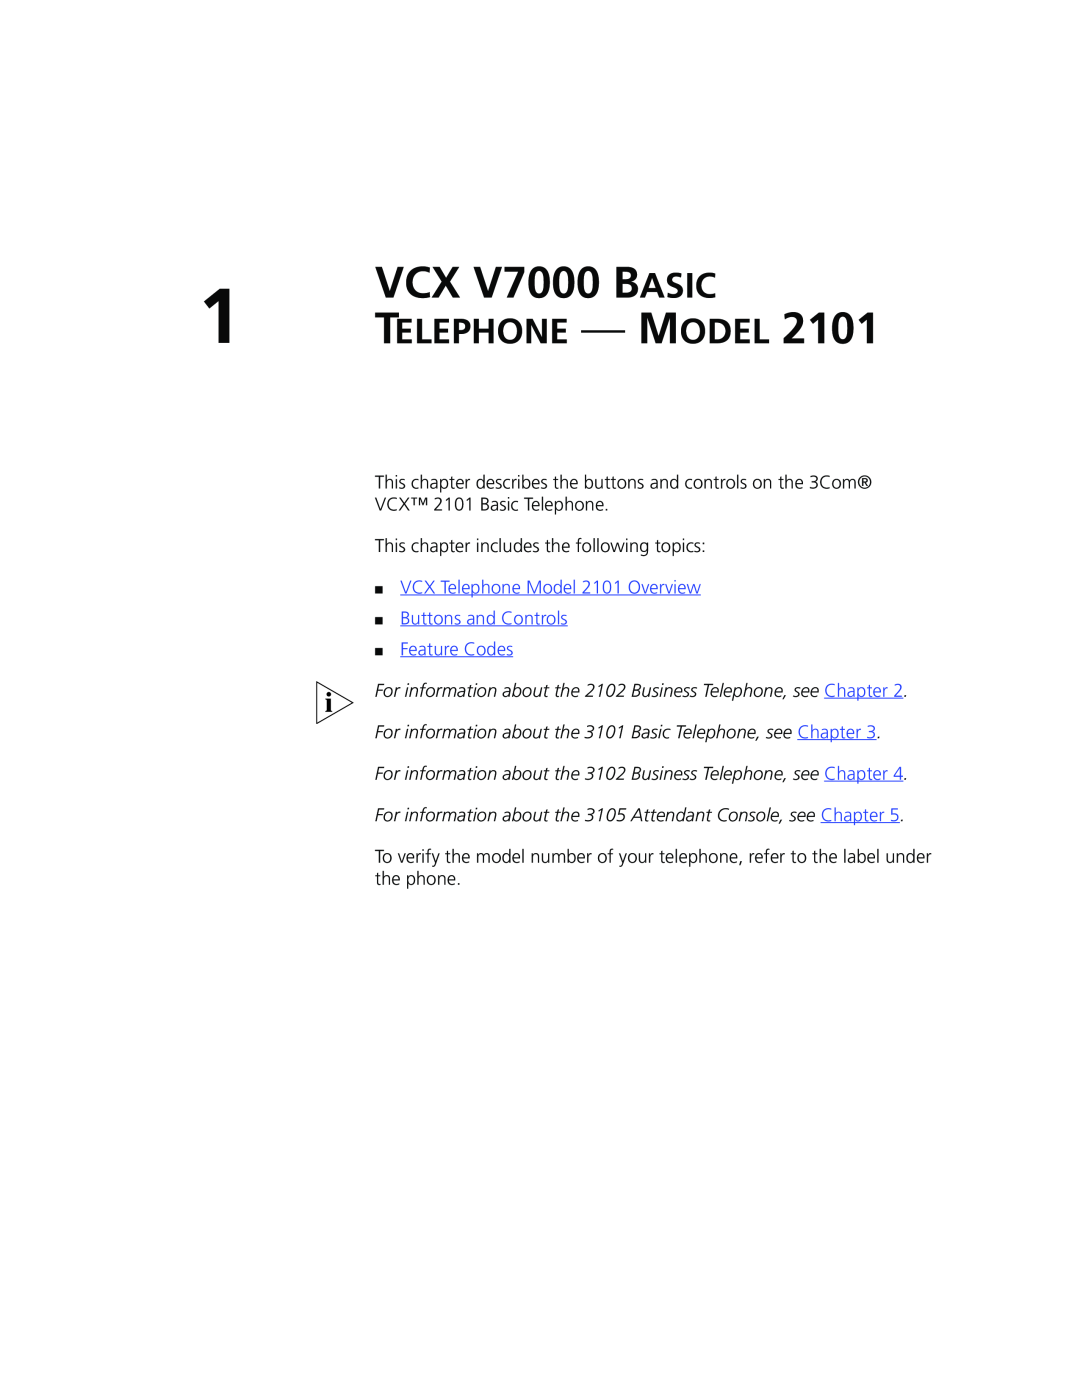 3Com manual VCX V7000 BASIC, Telephone - Model, VCX Telephone Model 2101 Overview Buttons and Controls Feature Codes 